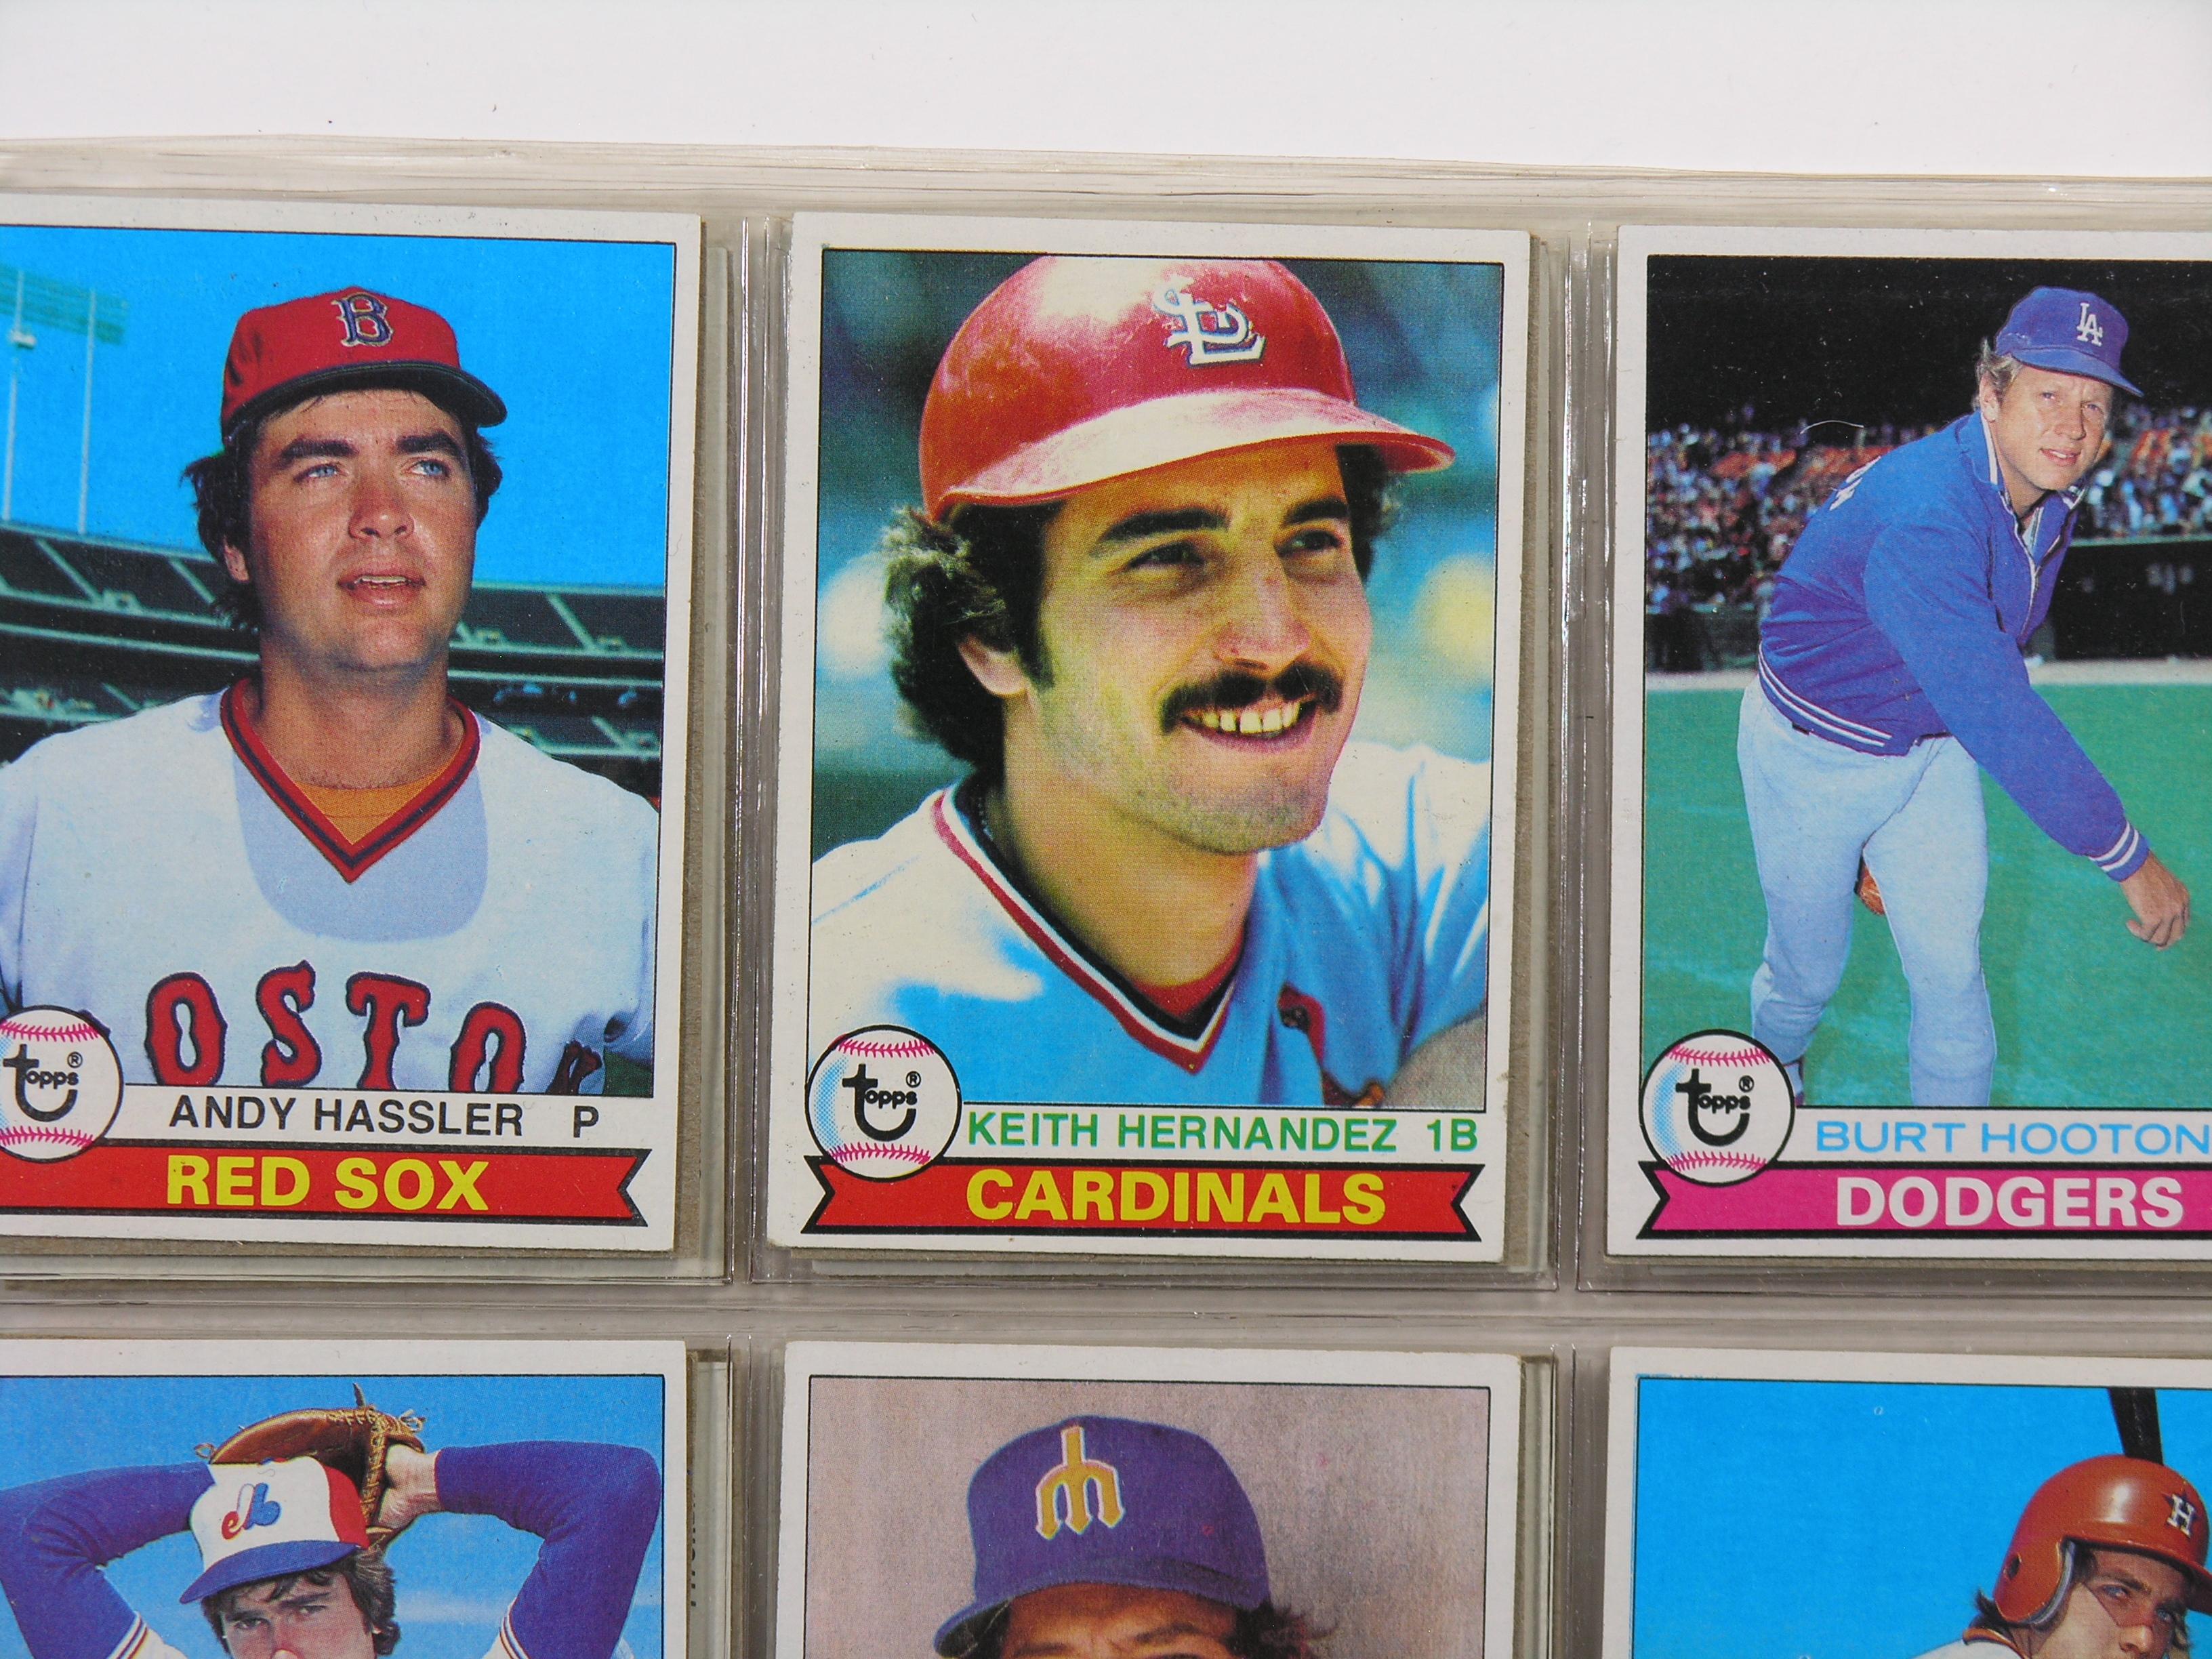 1979 Topps Baseball Card Complete Set. Includes Rookie Ozzie Smith and Many